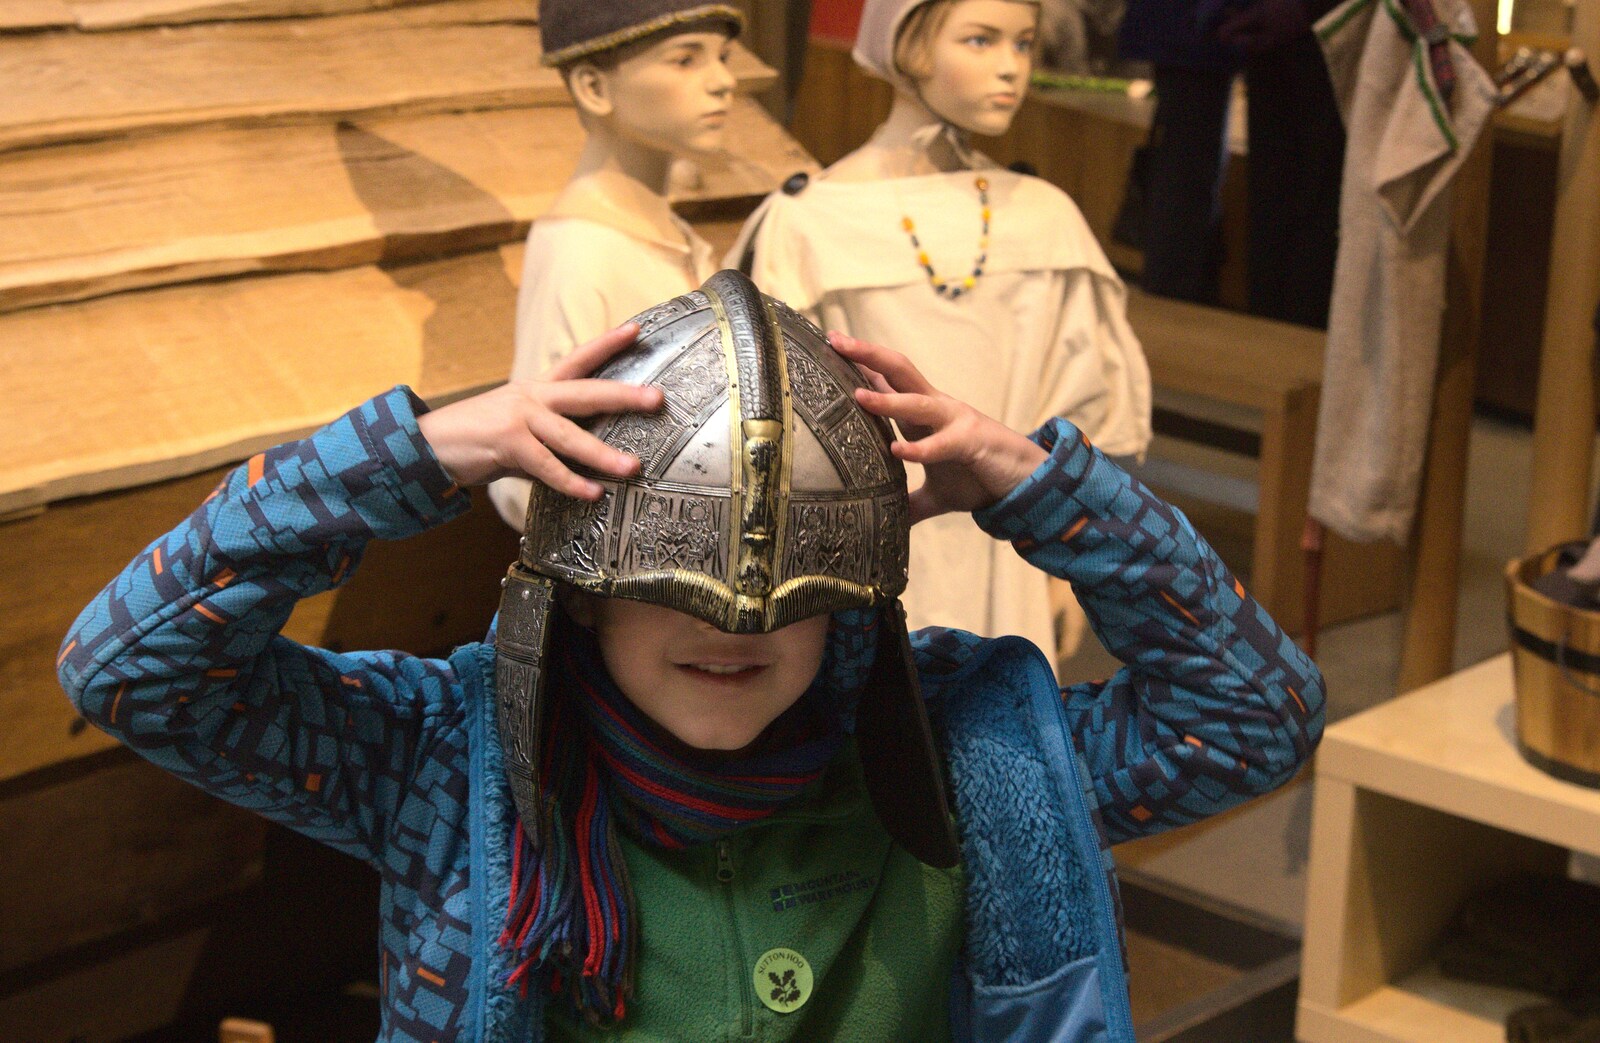 Fred tries on a helmet from A Trip to Sutton Hoo, Woodbridge, Suffolk - 29th January 2017